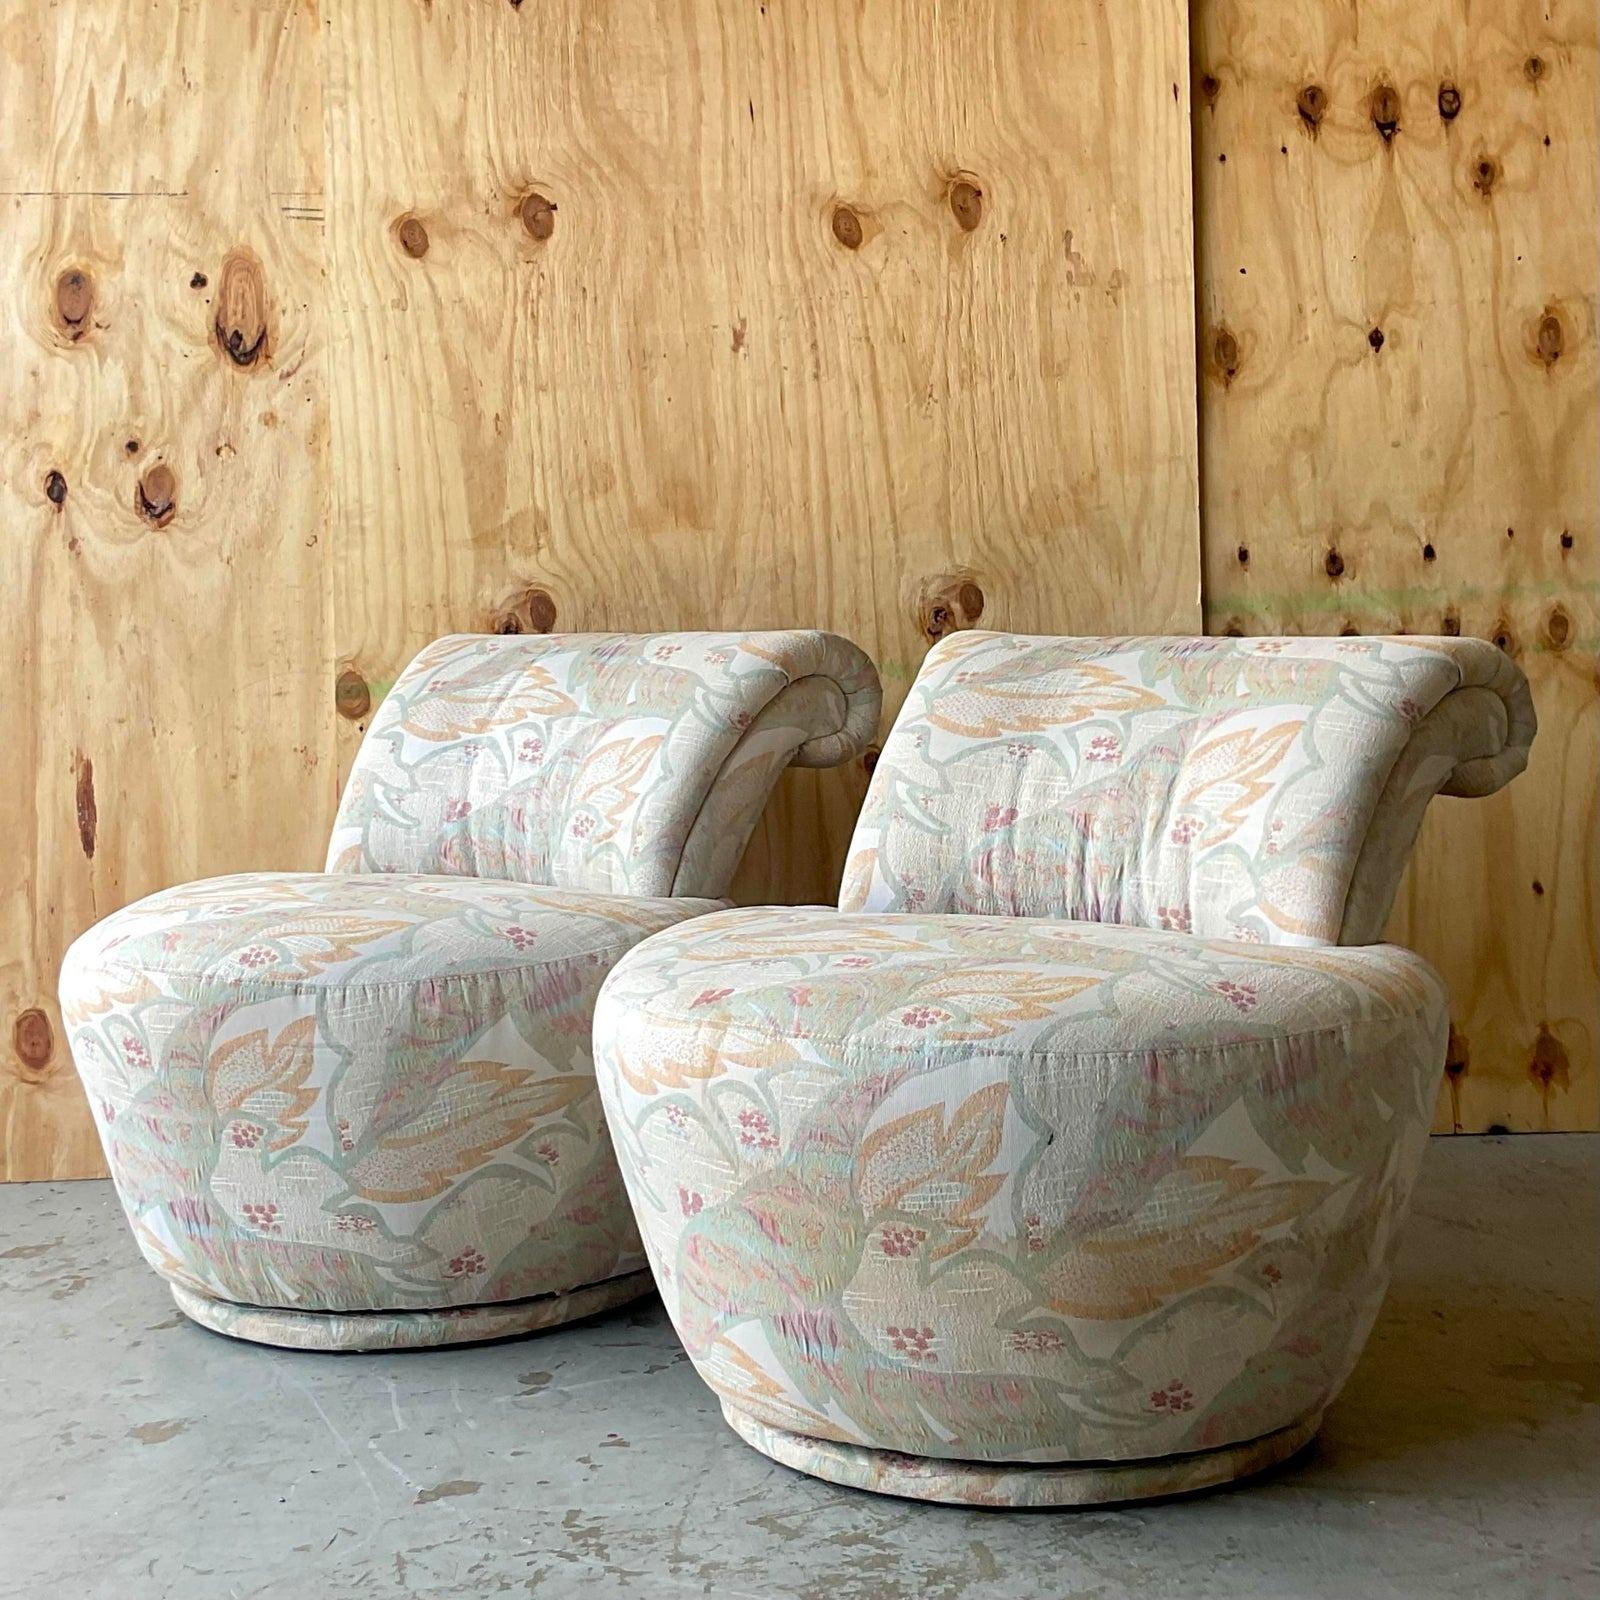 An incredible set of vintage Boho swivel chairs. Made by the iconic Weiman group. A chic scroll back in a neutral jacquard. Tagged on the bottom. Acquired from a Palm Beach estate.